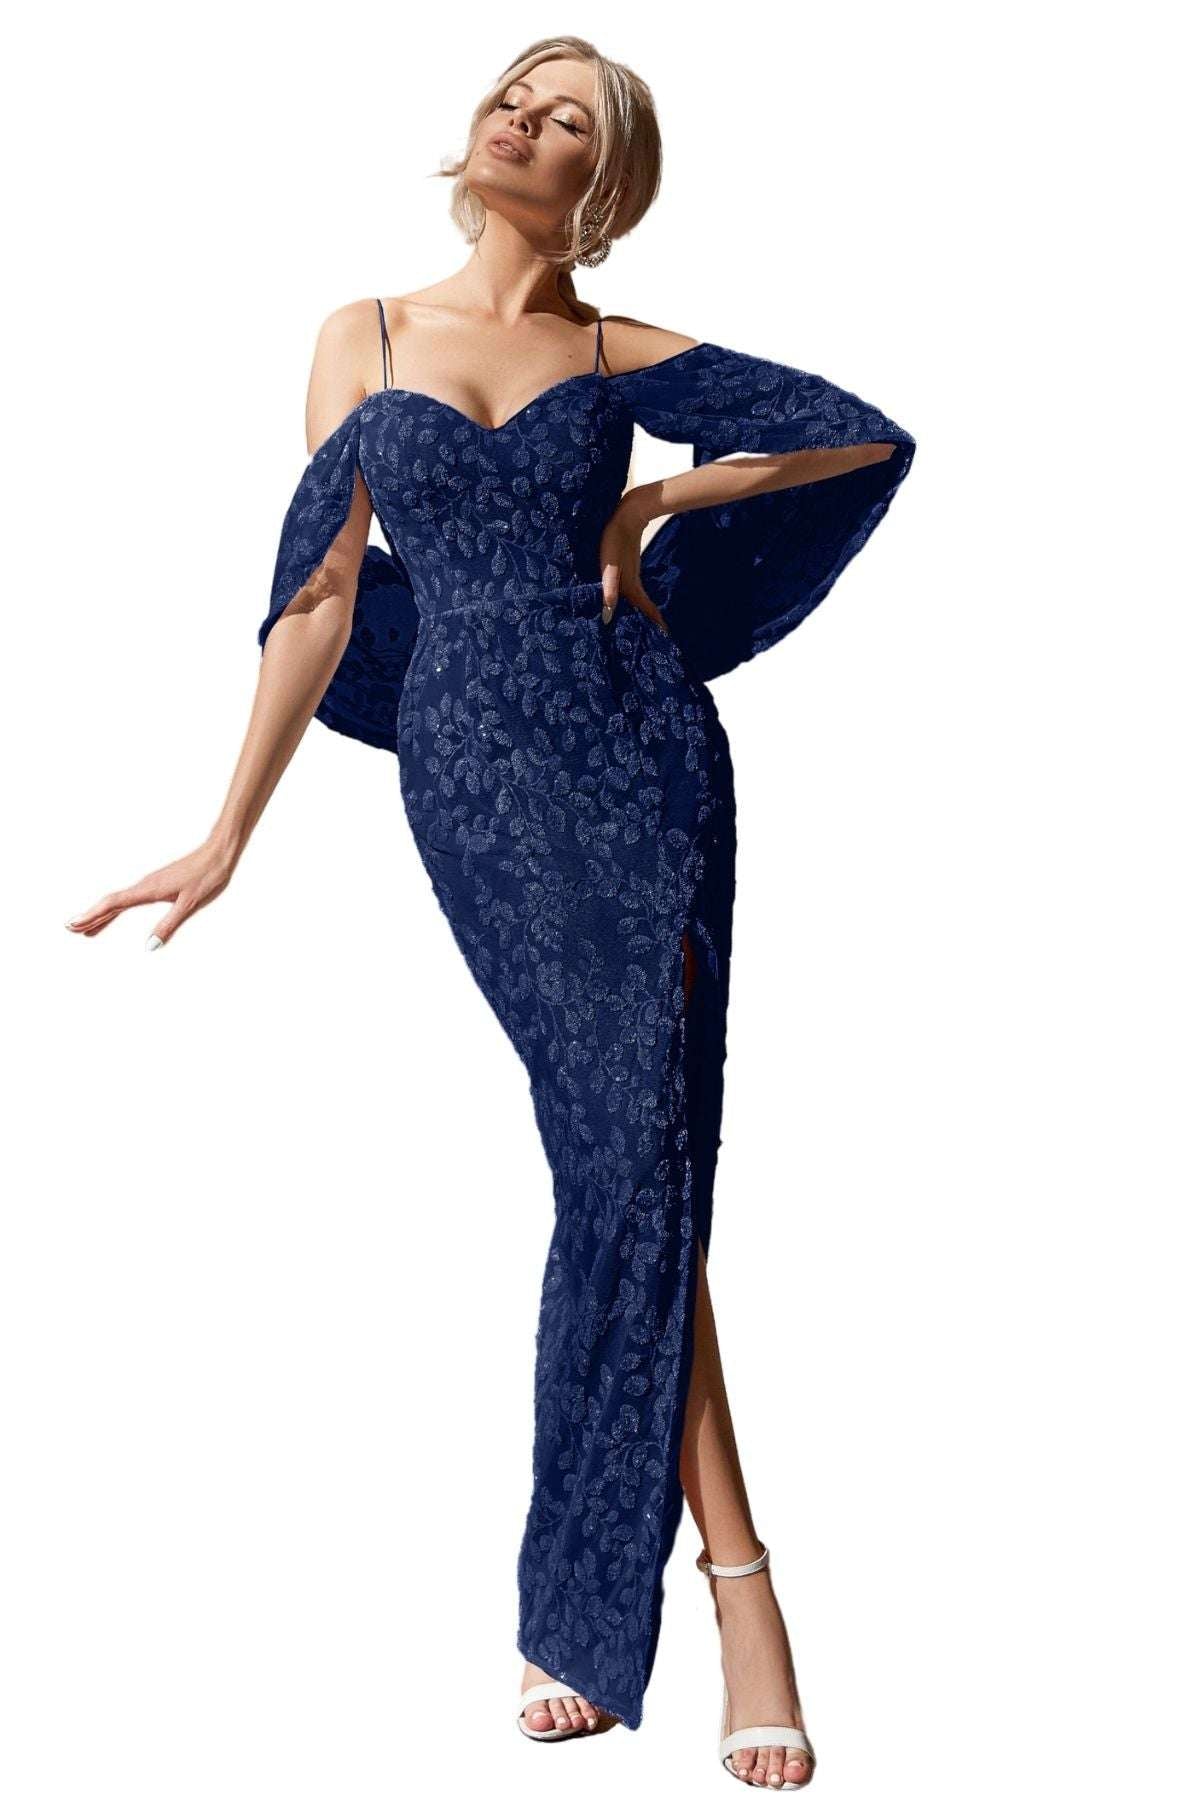 Tinaholly TINAHOLLY Lavinia  Tk048 Sequin Dress (Navy)- RRP $499 - tinaholly-lavinia-tk048-sequin-dress-navy--rrp-9-dress-for-a-night-30756913.jpg